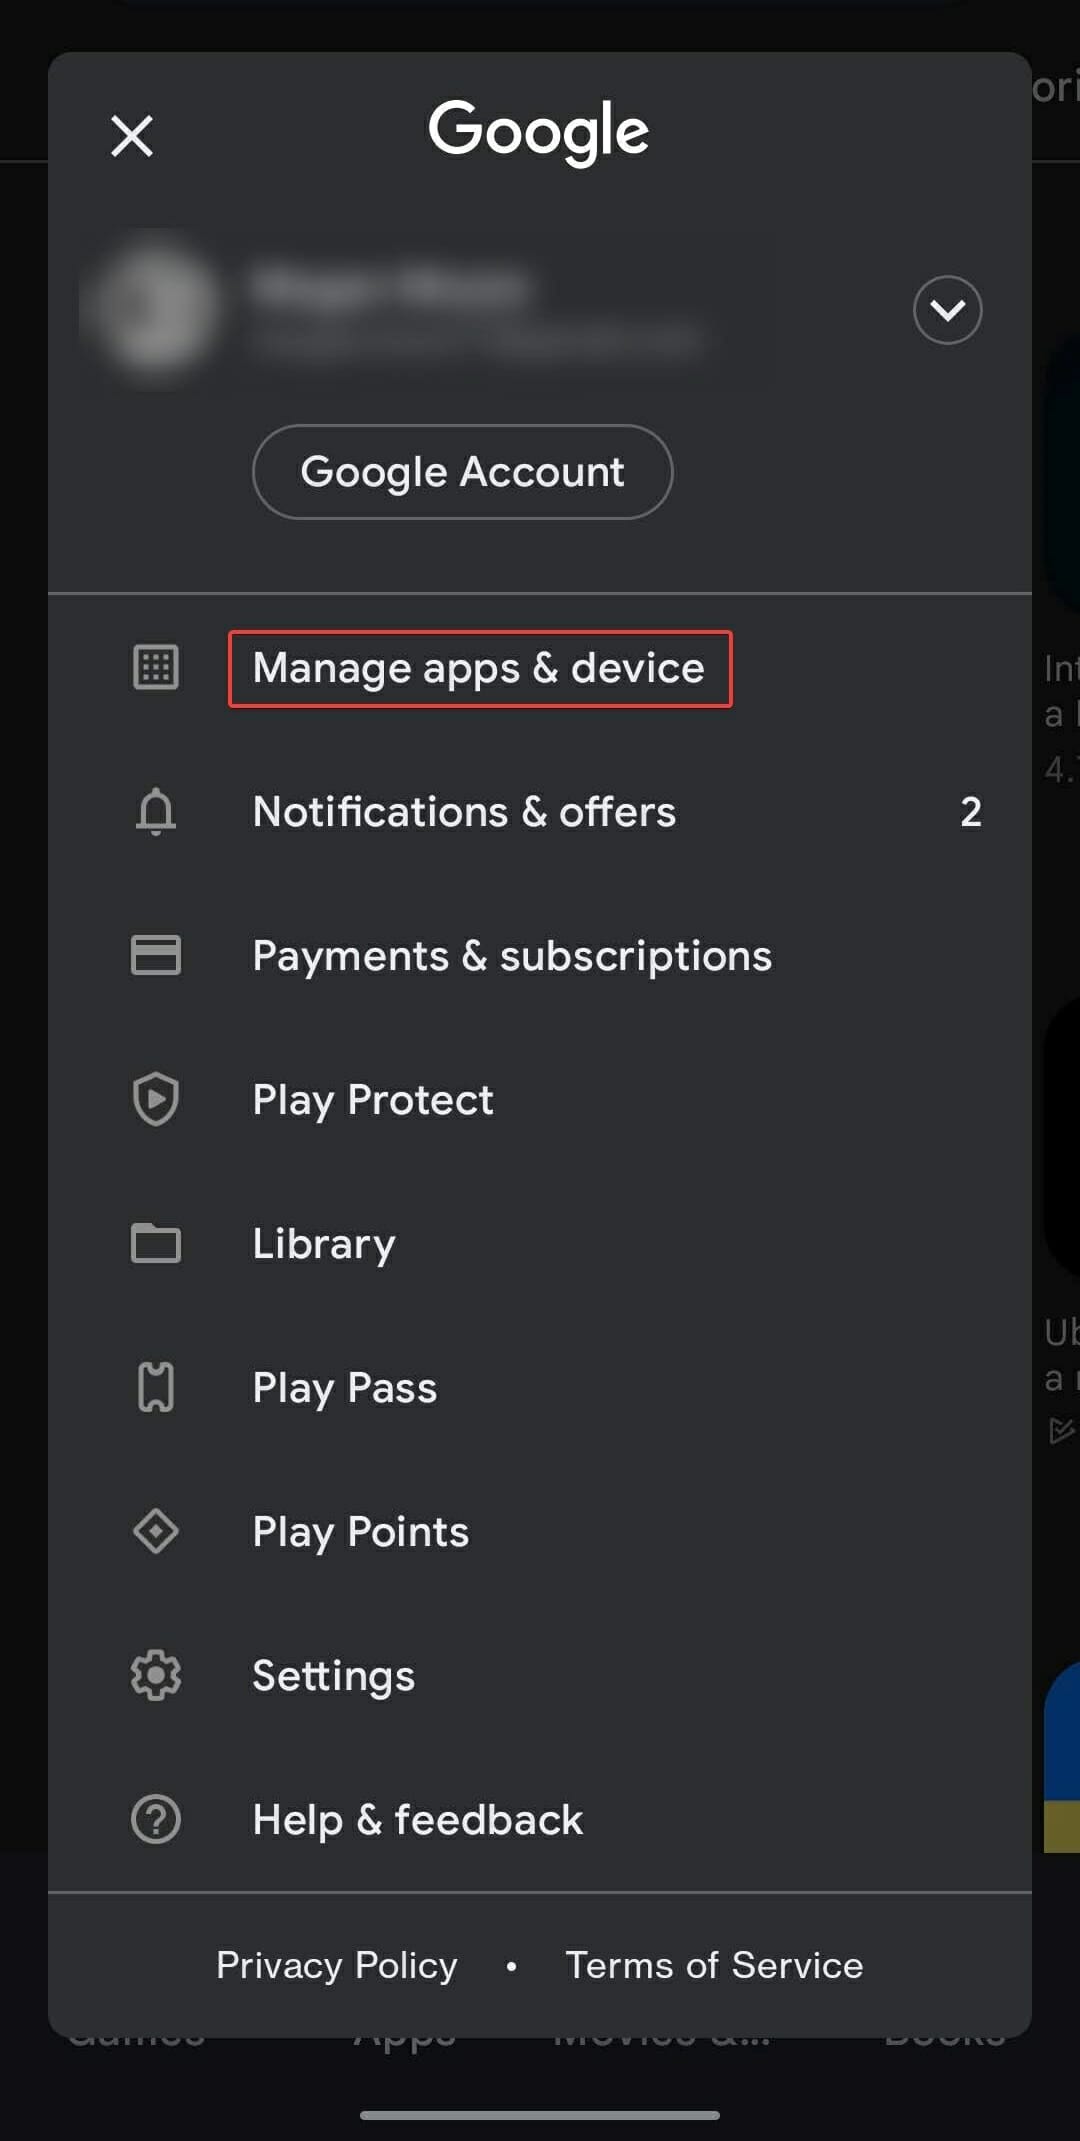 in your profile select manage apps and device.